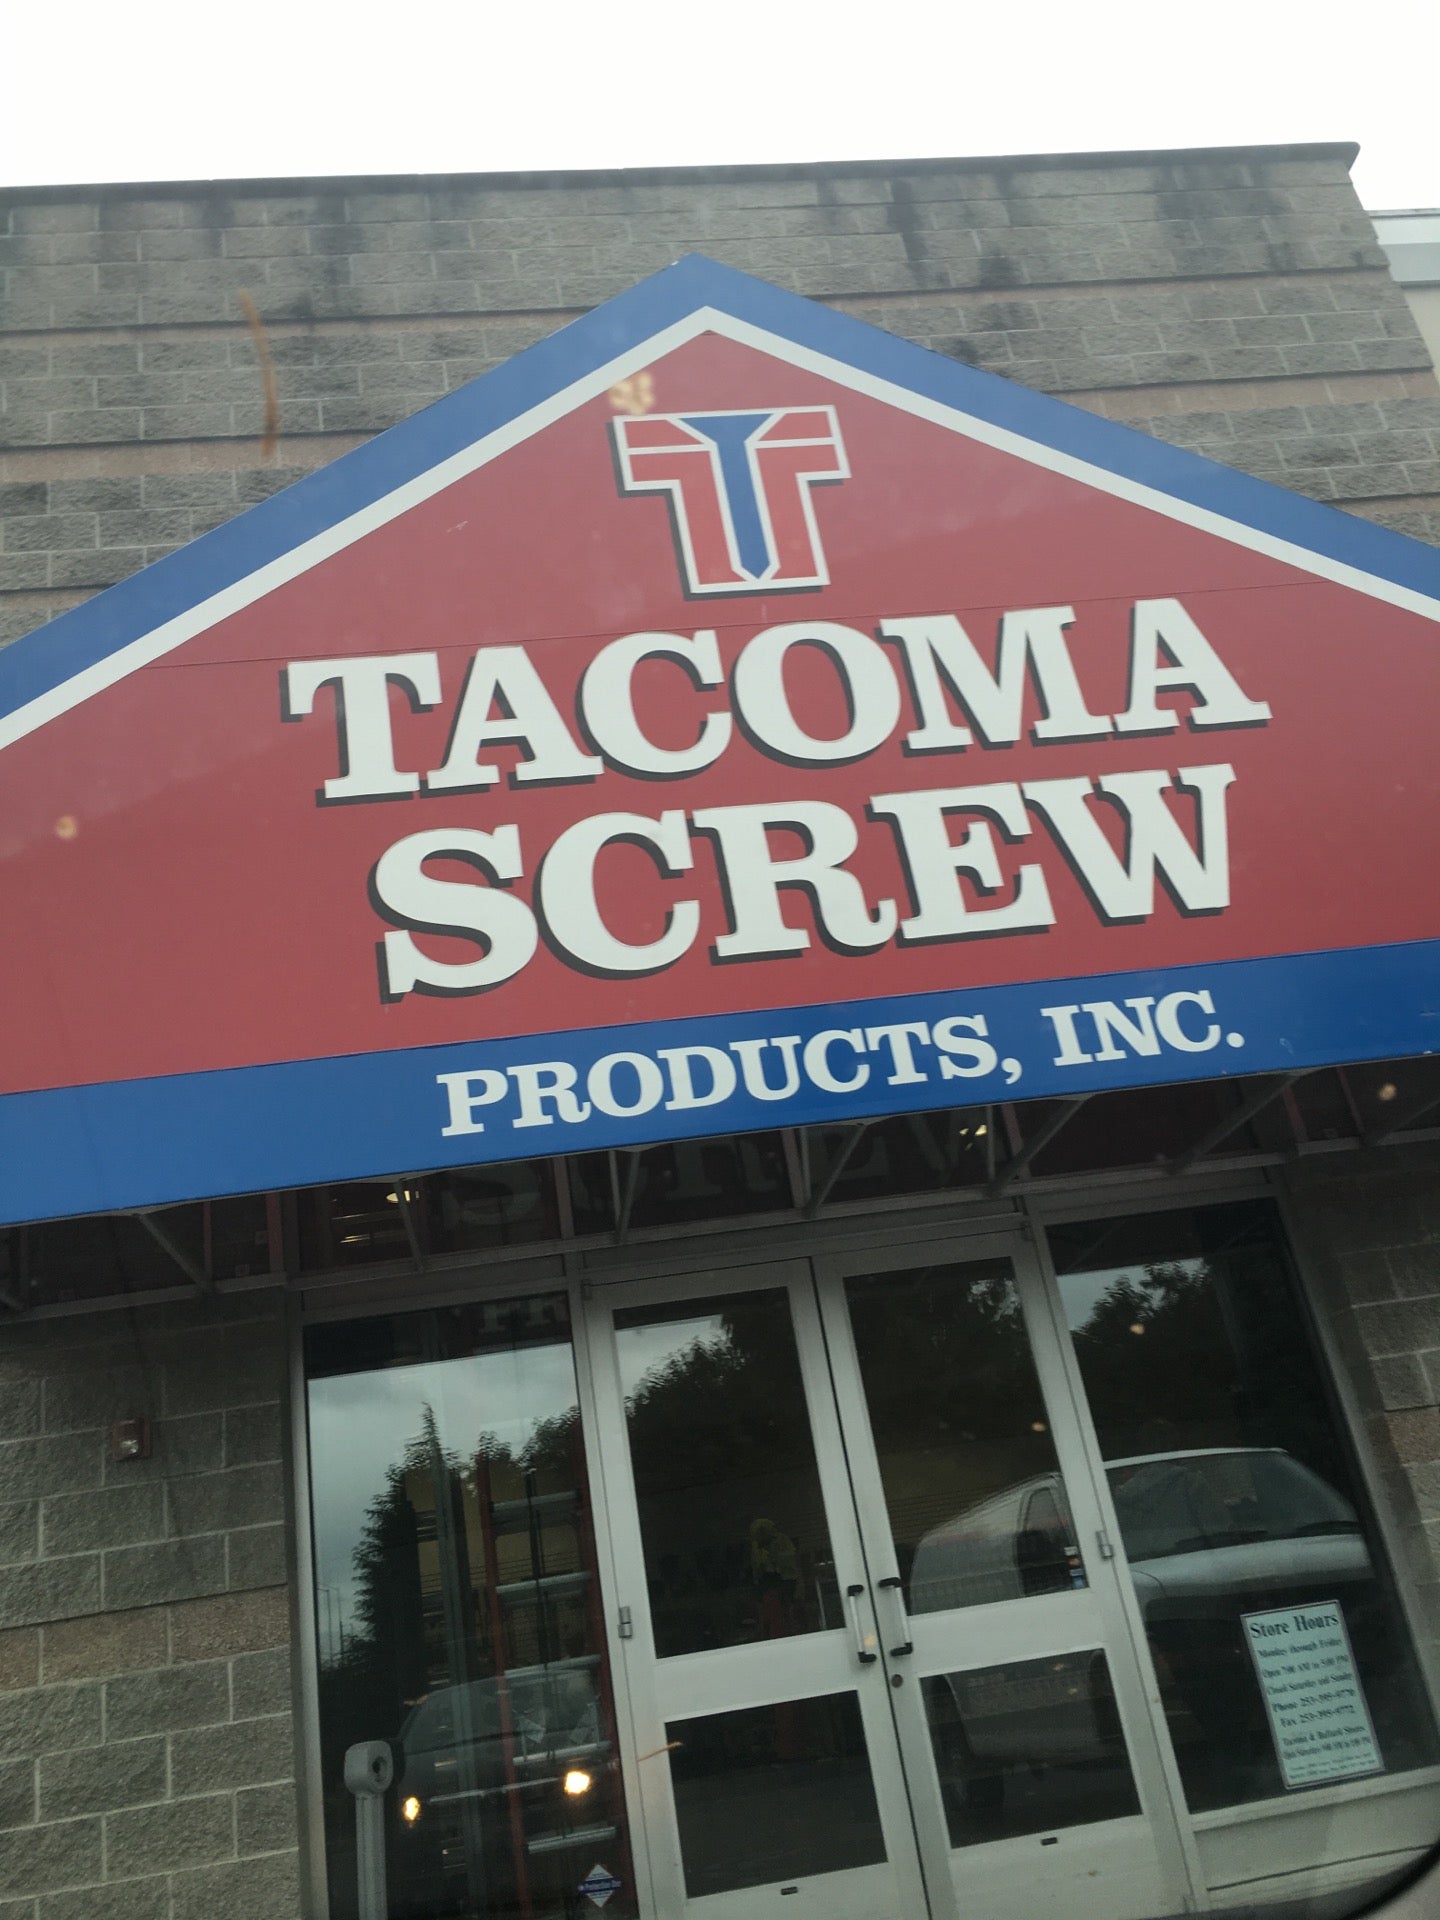 Tacoma Screw Products